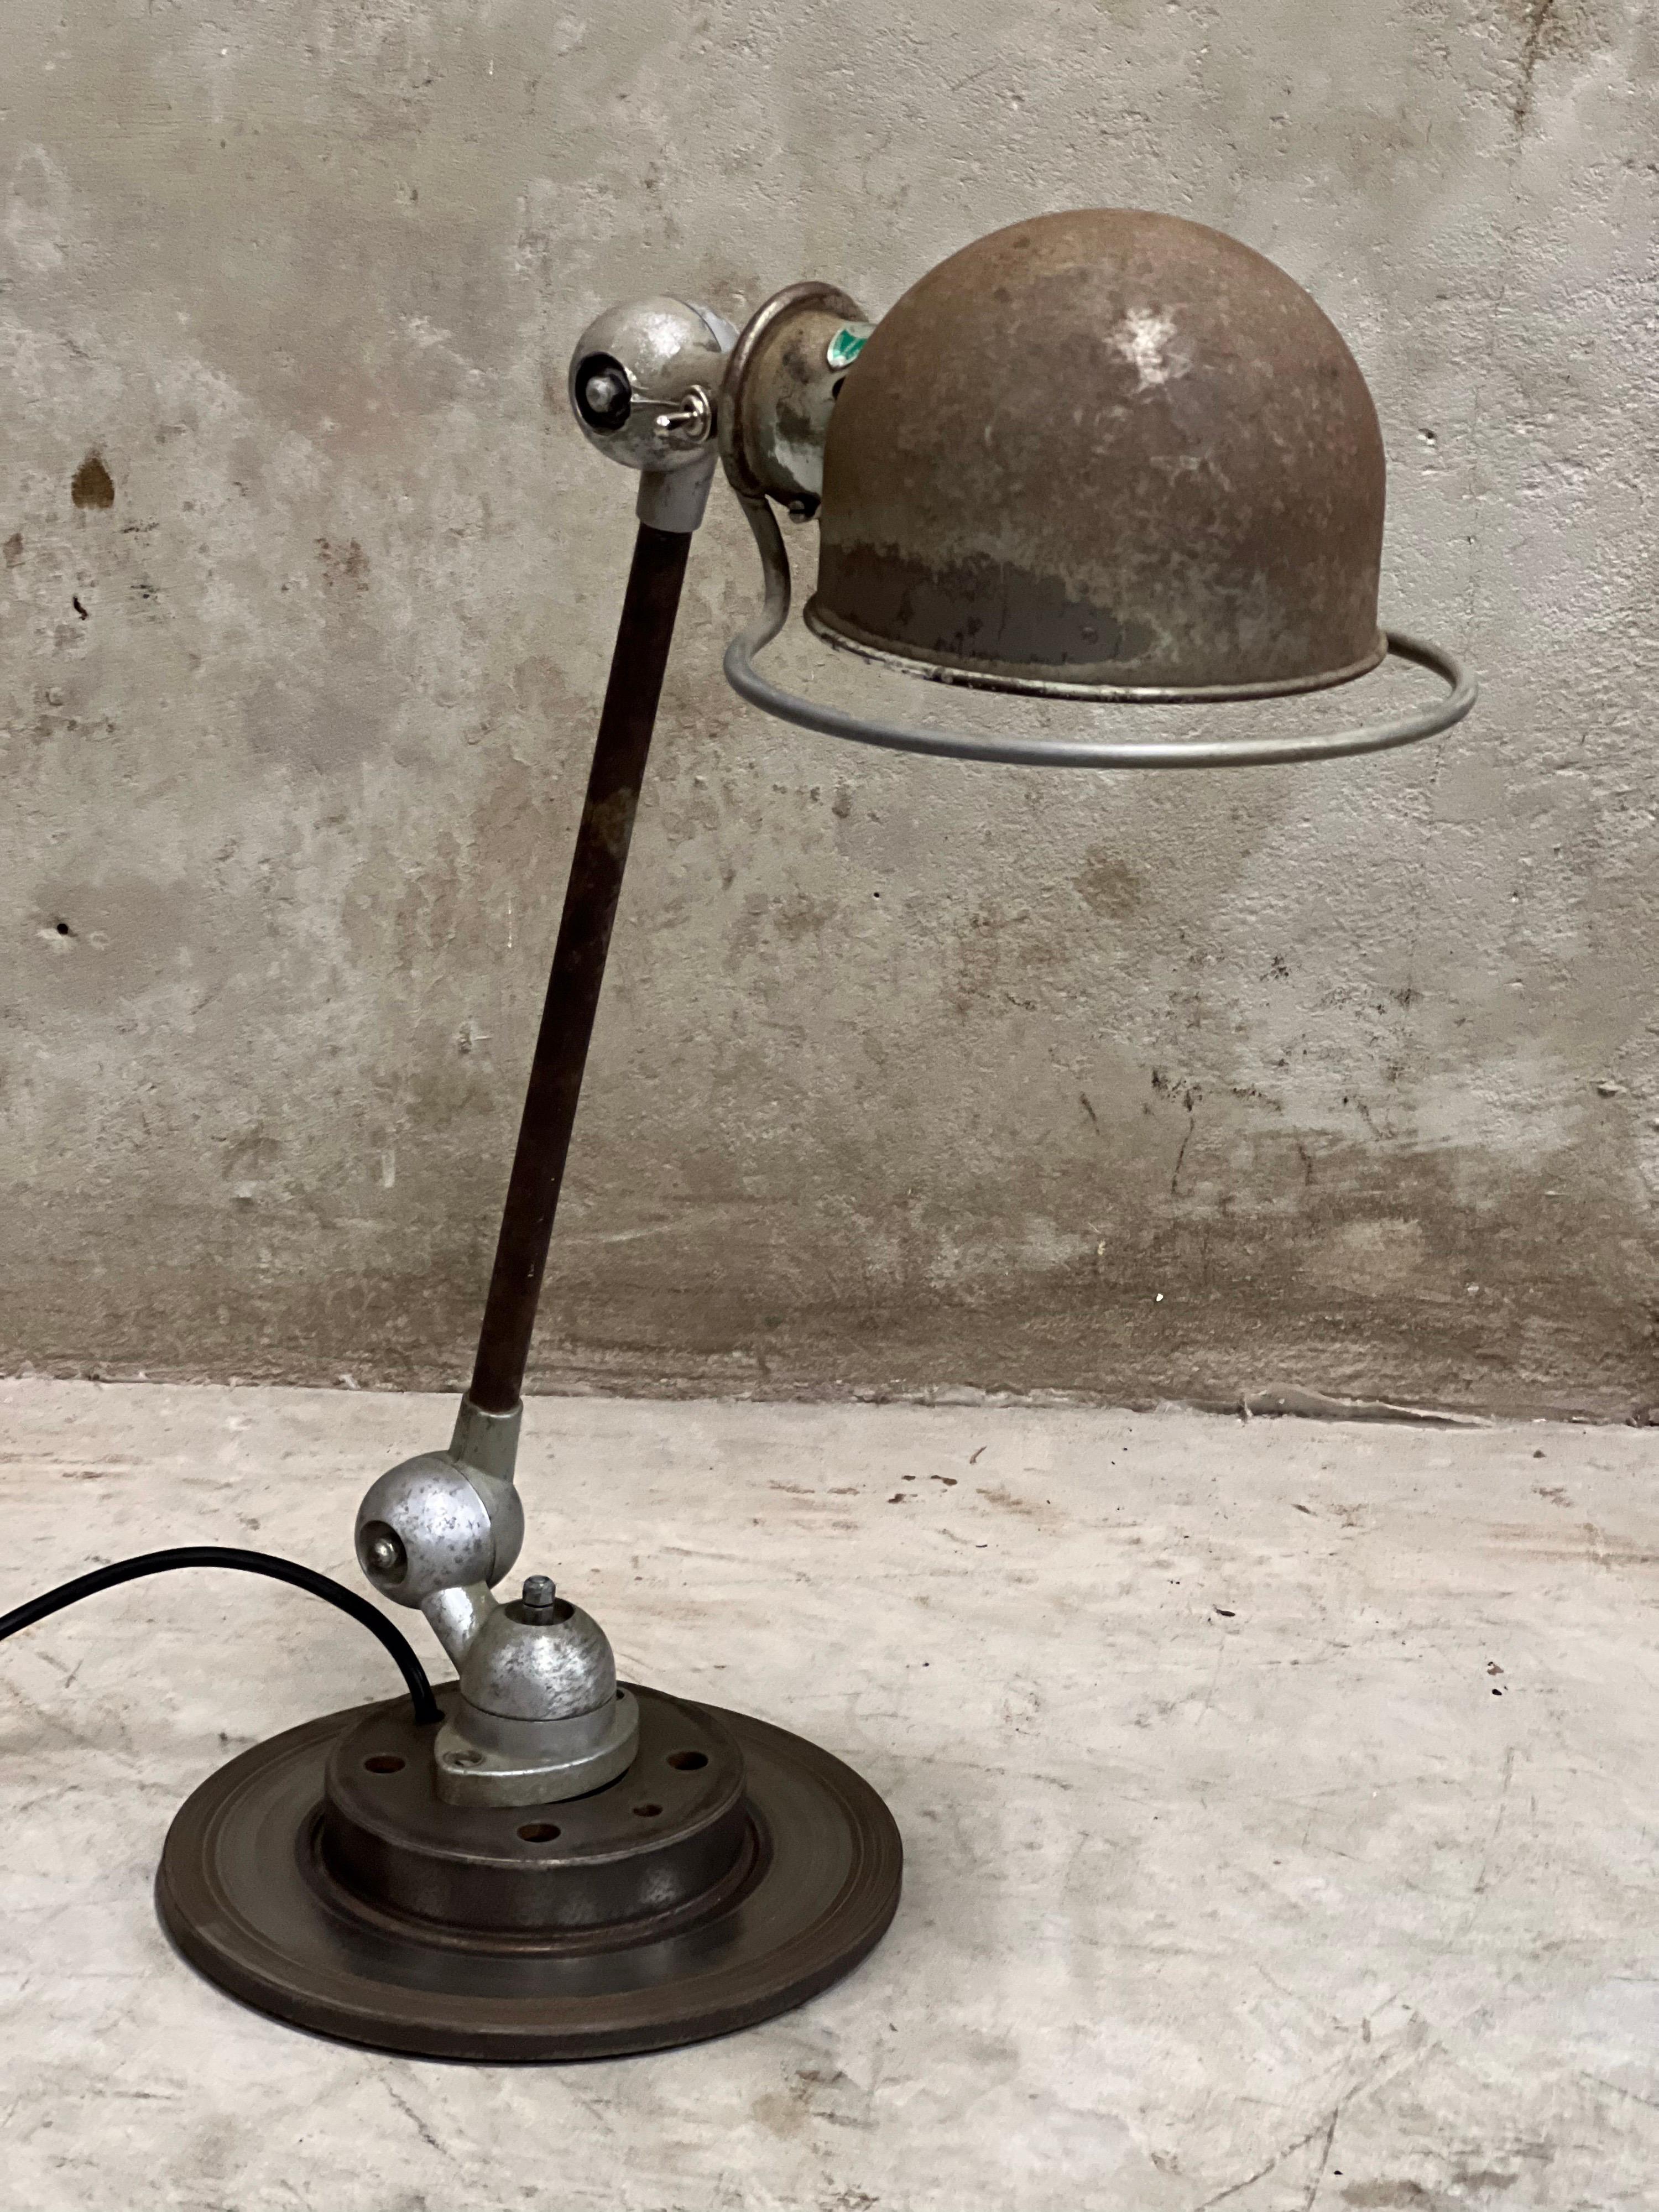 Industrial lamp by Jean-Louis Domecq for Jieldé, France. Original old Jieldé table lamp with a fantastic patina! E27 fitting including lamp. Placed on an old brake disc. Design icon from the 50s to the present. The ravages of time are certainly